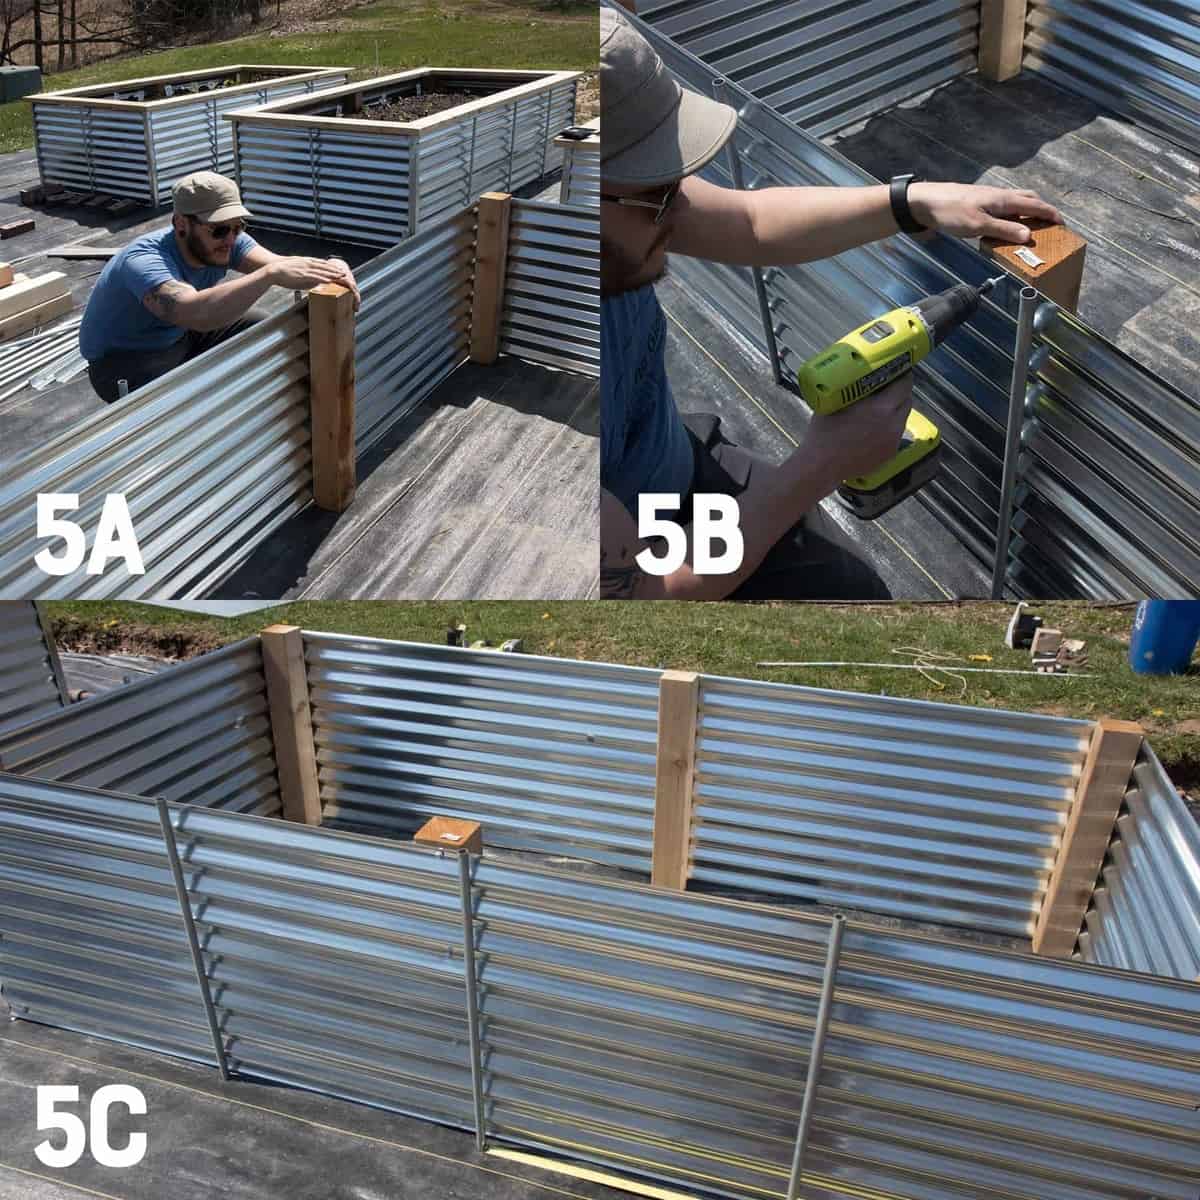 Three image collage of reinforcing a galvanized steel raised bed with conduit and cedar